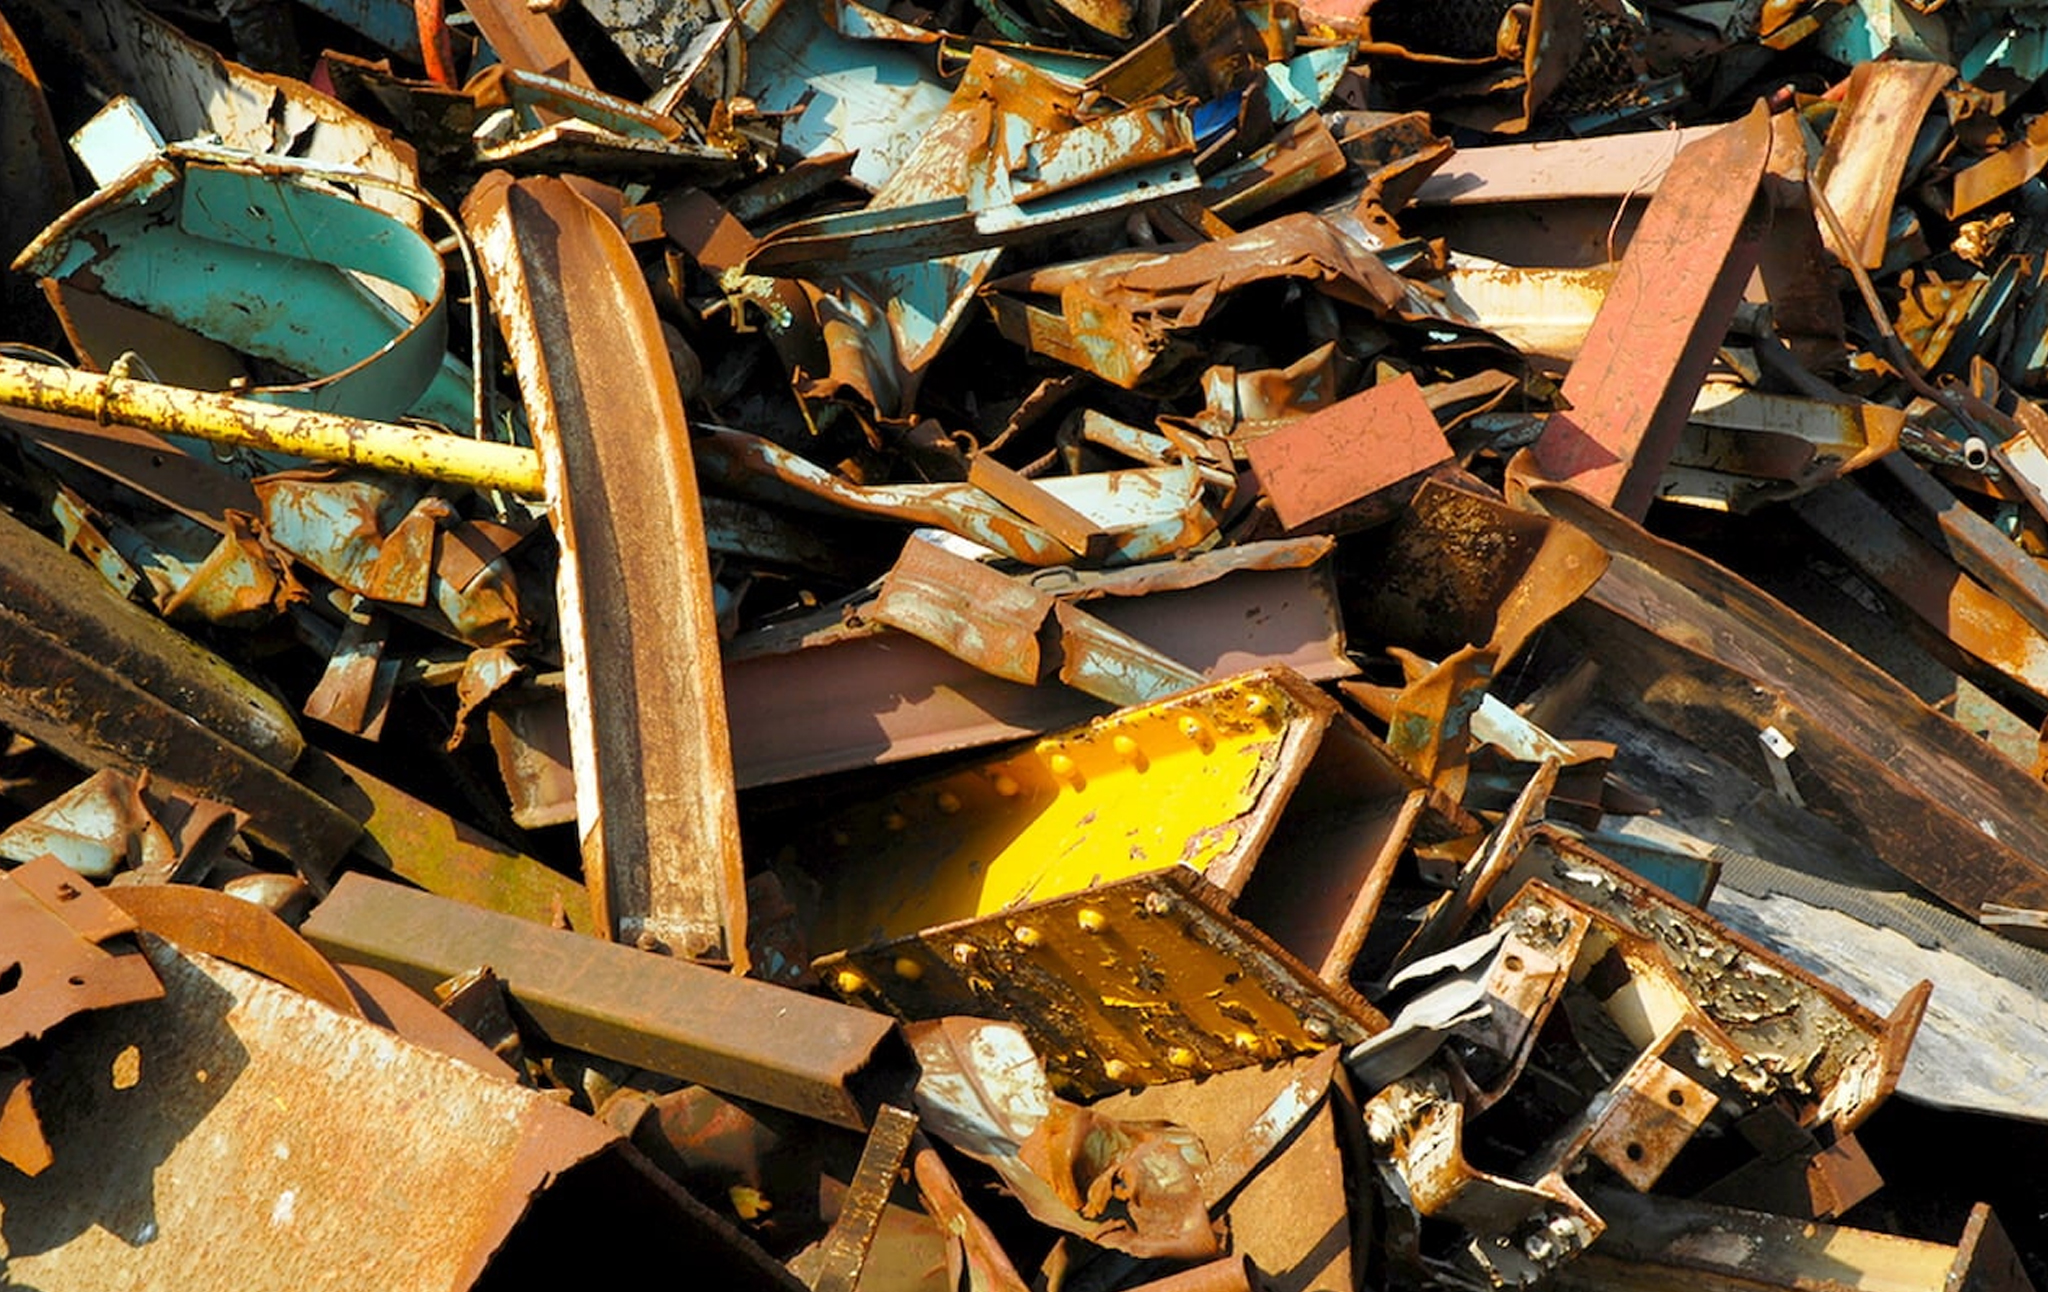 Scrap Metal Purchasers near me